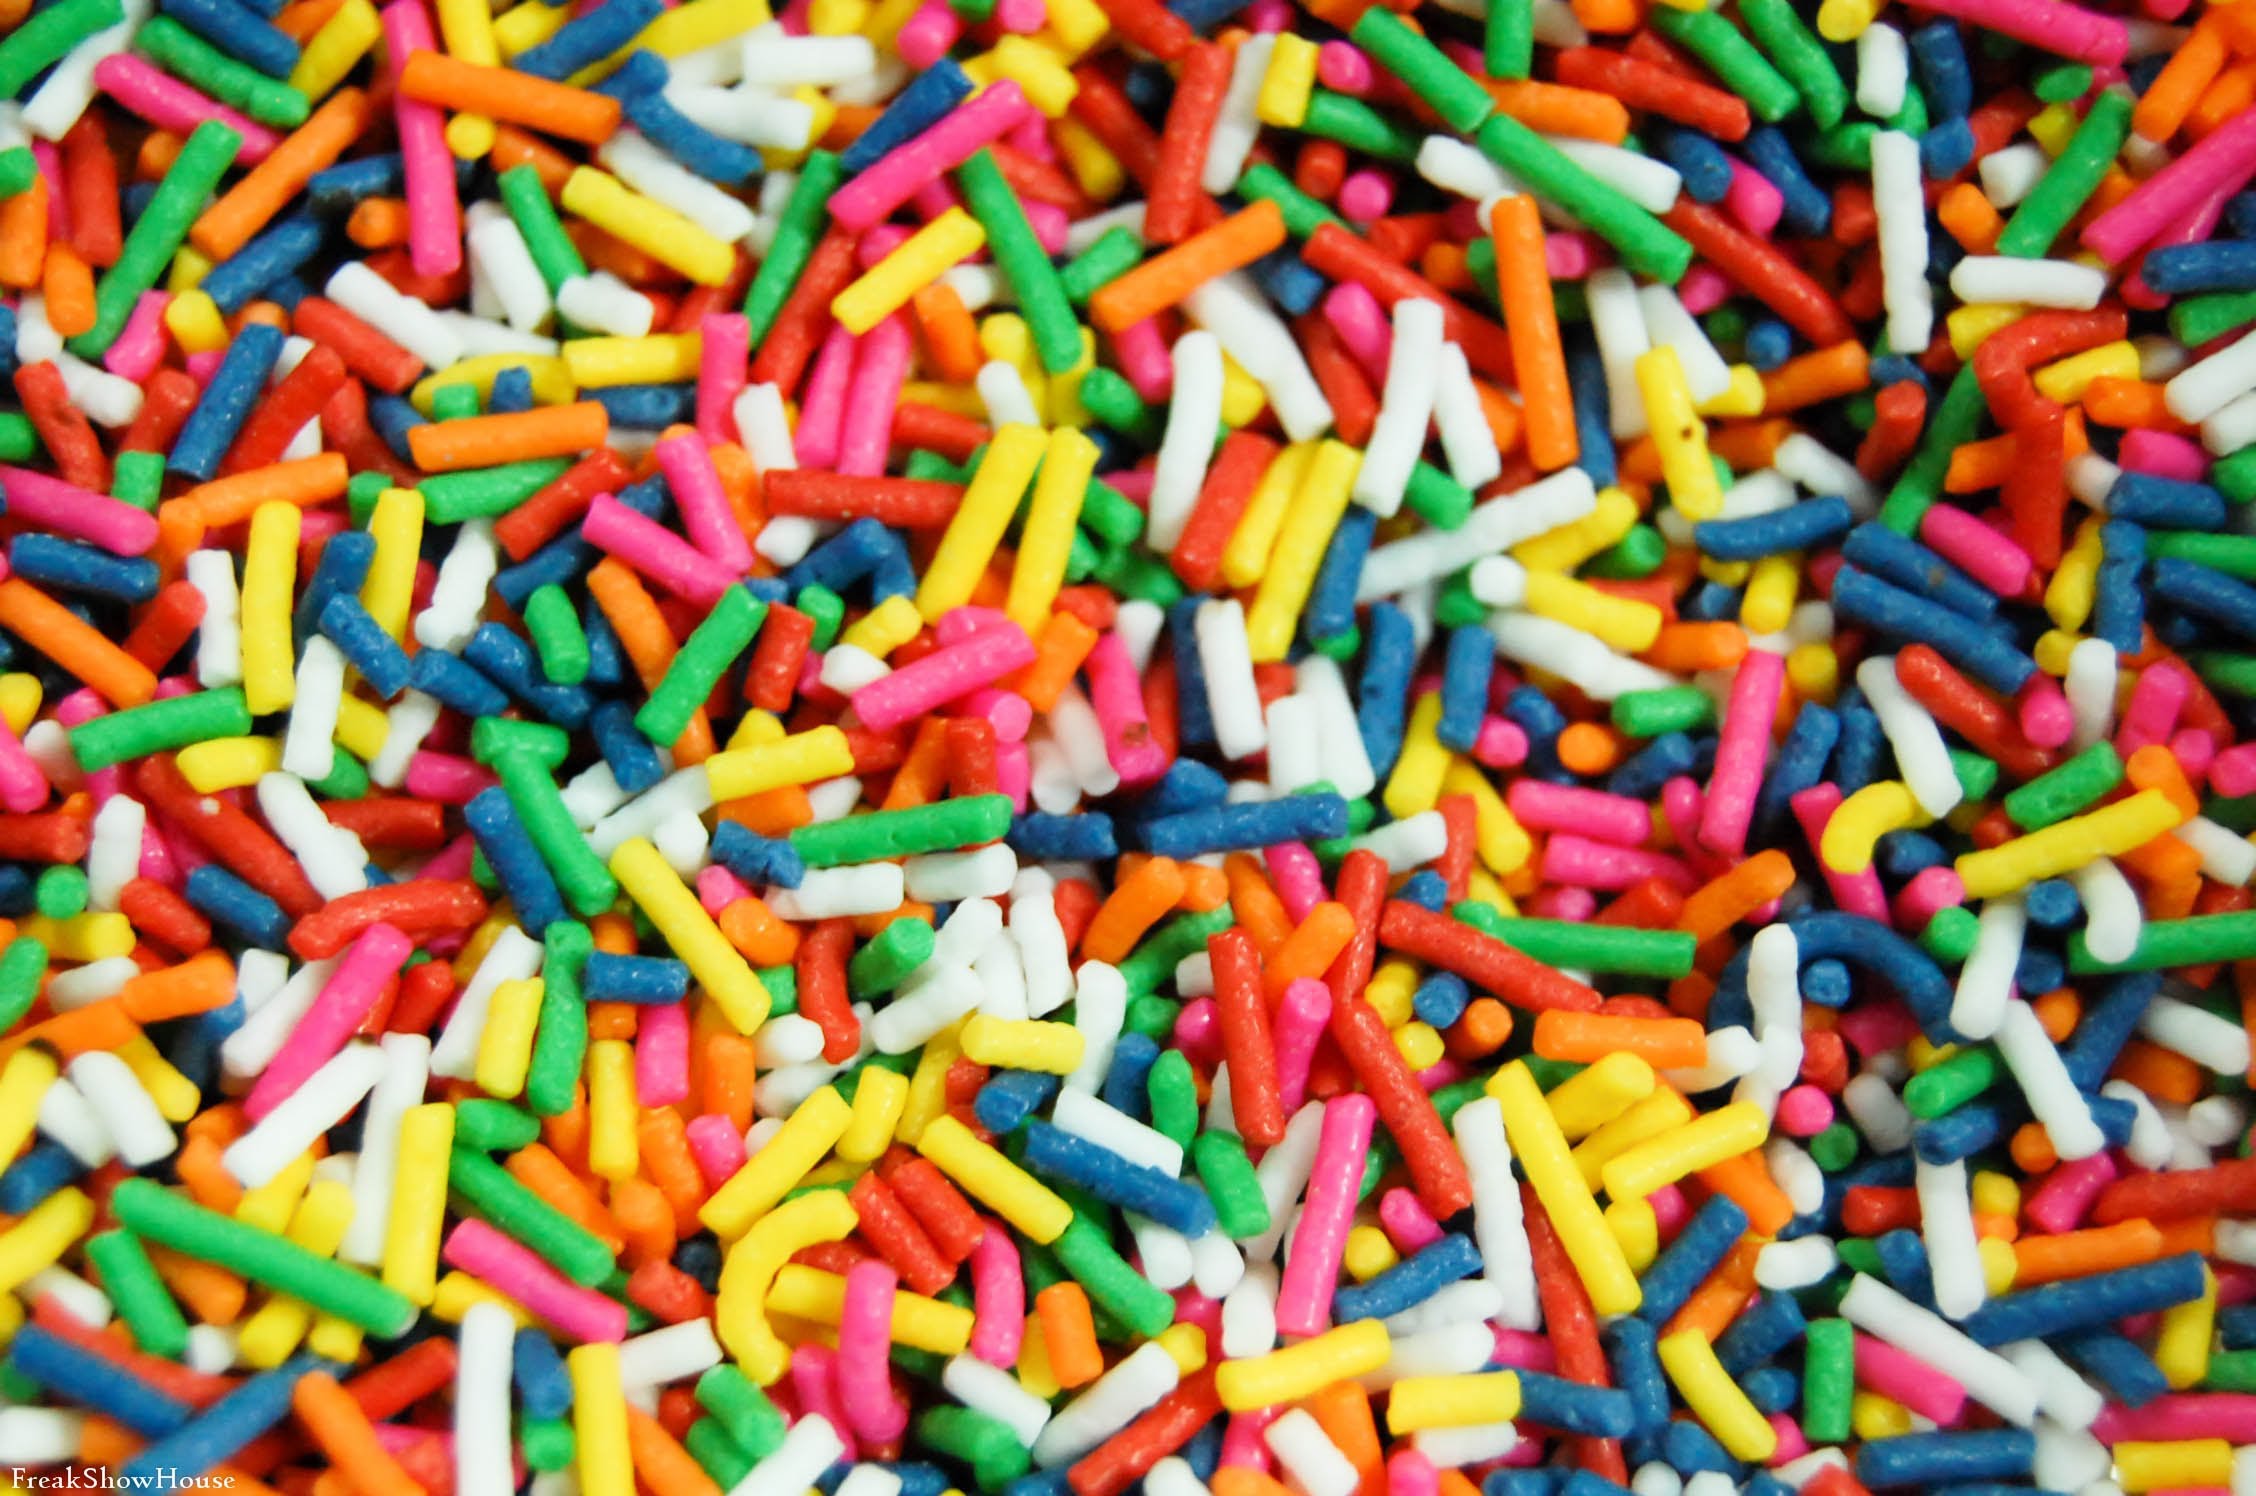 How to Make Sprinkles from Scratch! - YouTube